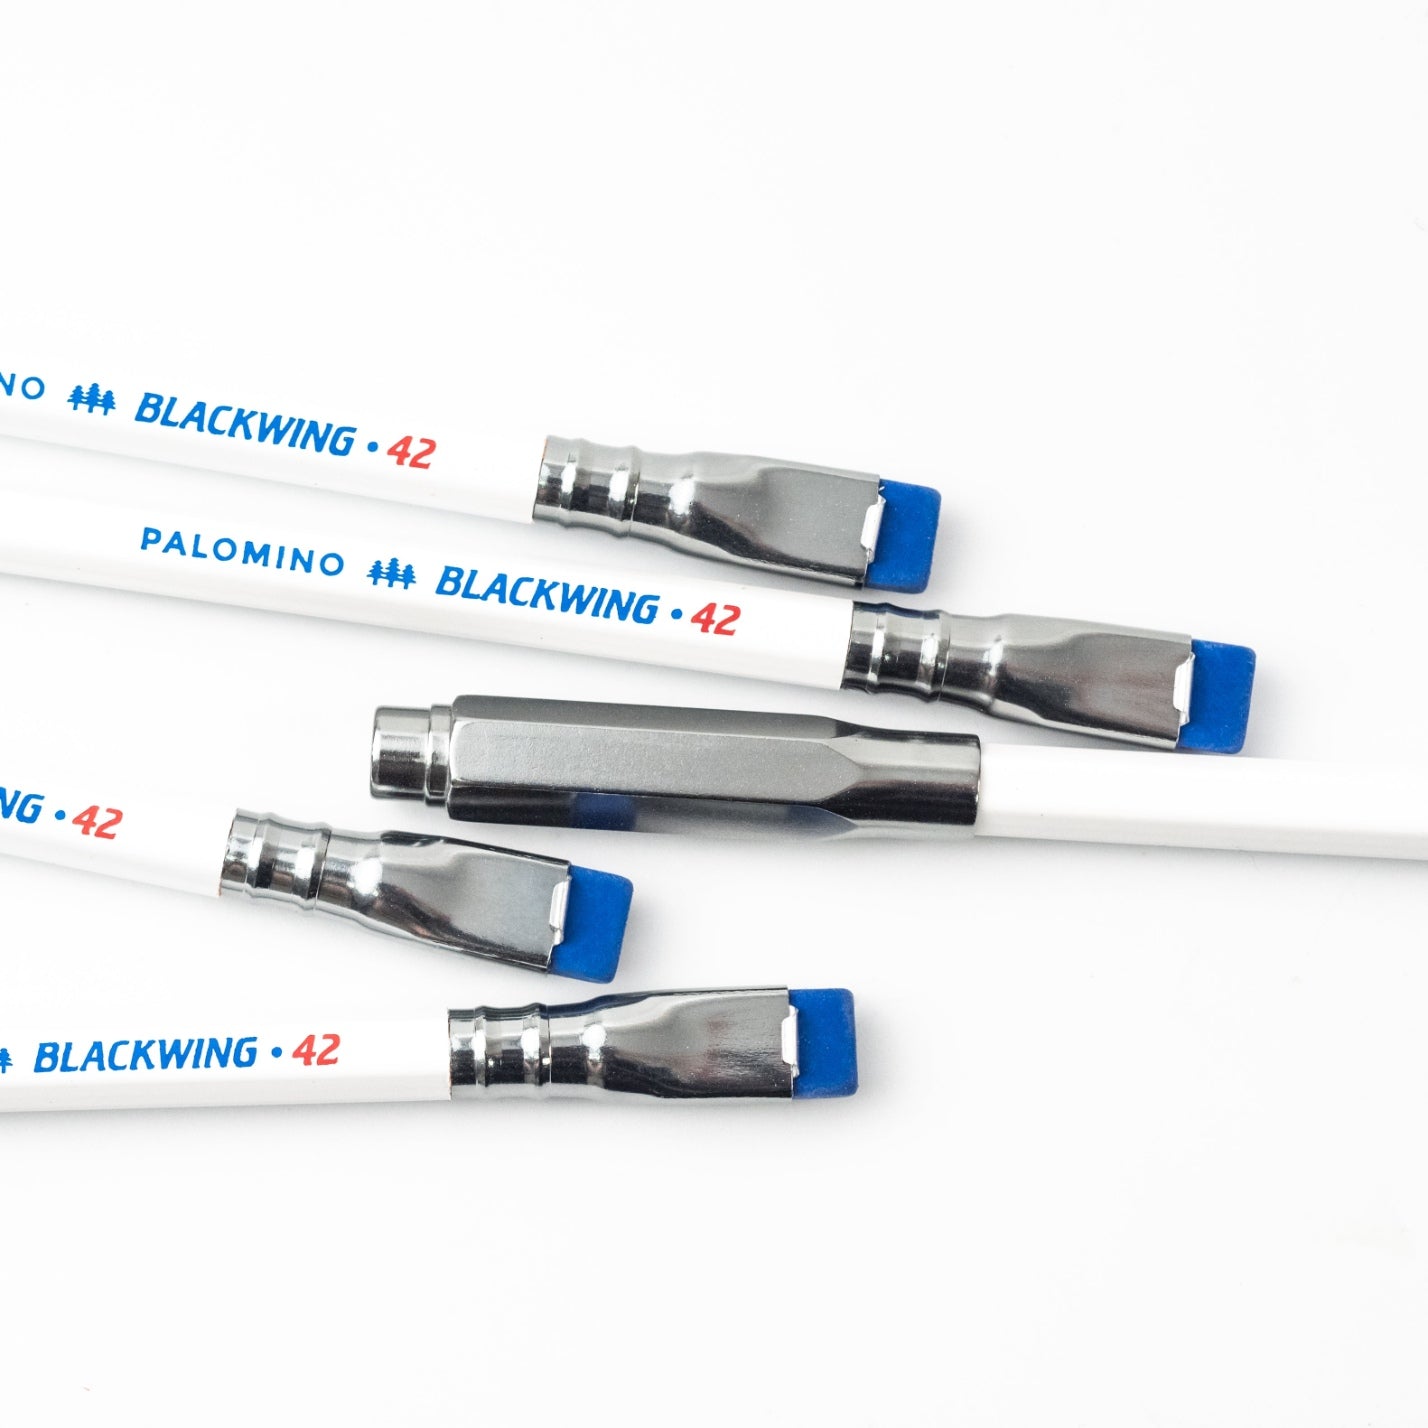 BLACKWING Pencil Limited Edition Volumes 42 Jackie Robinson Default Title